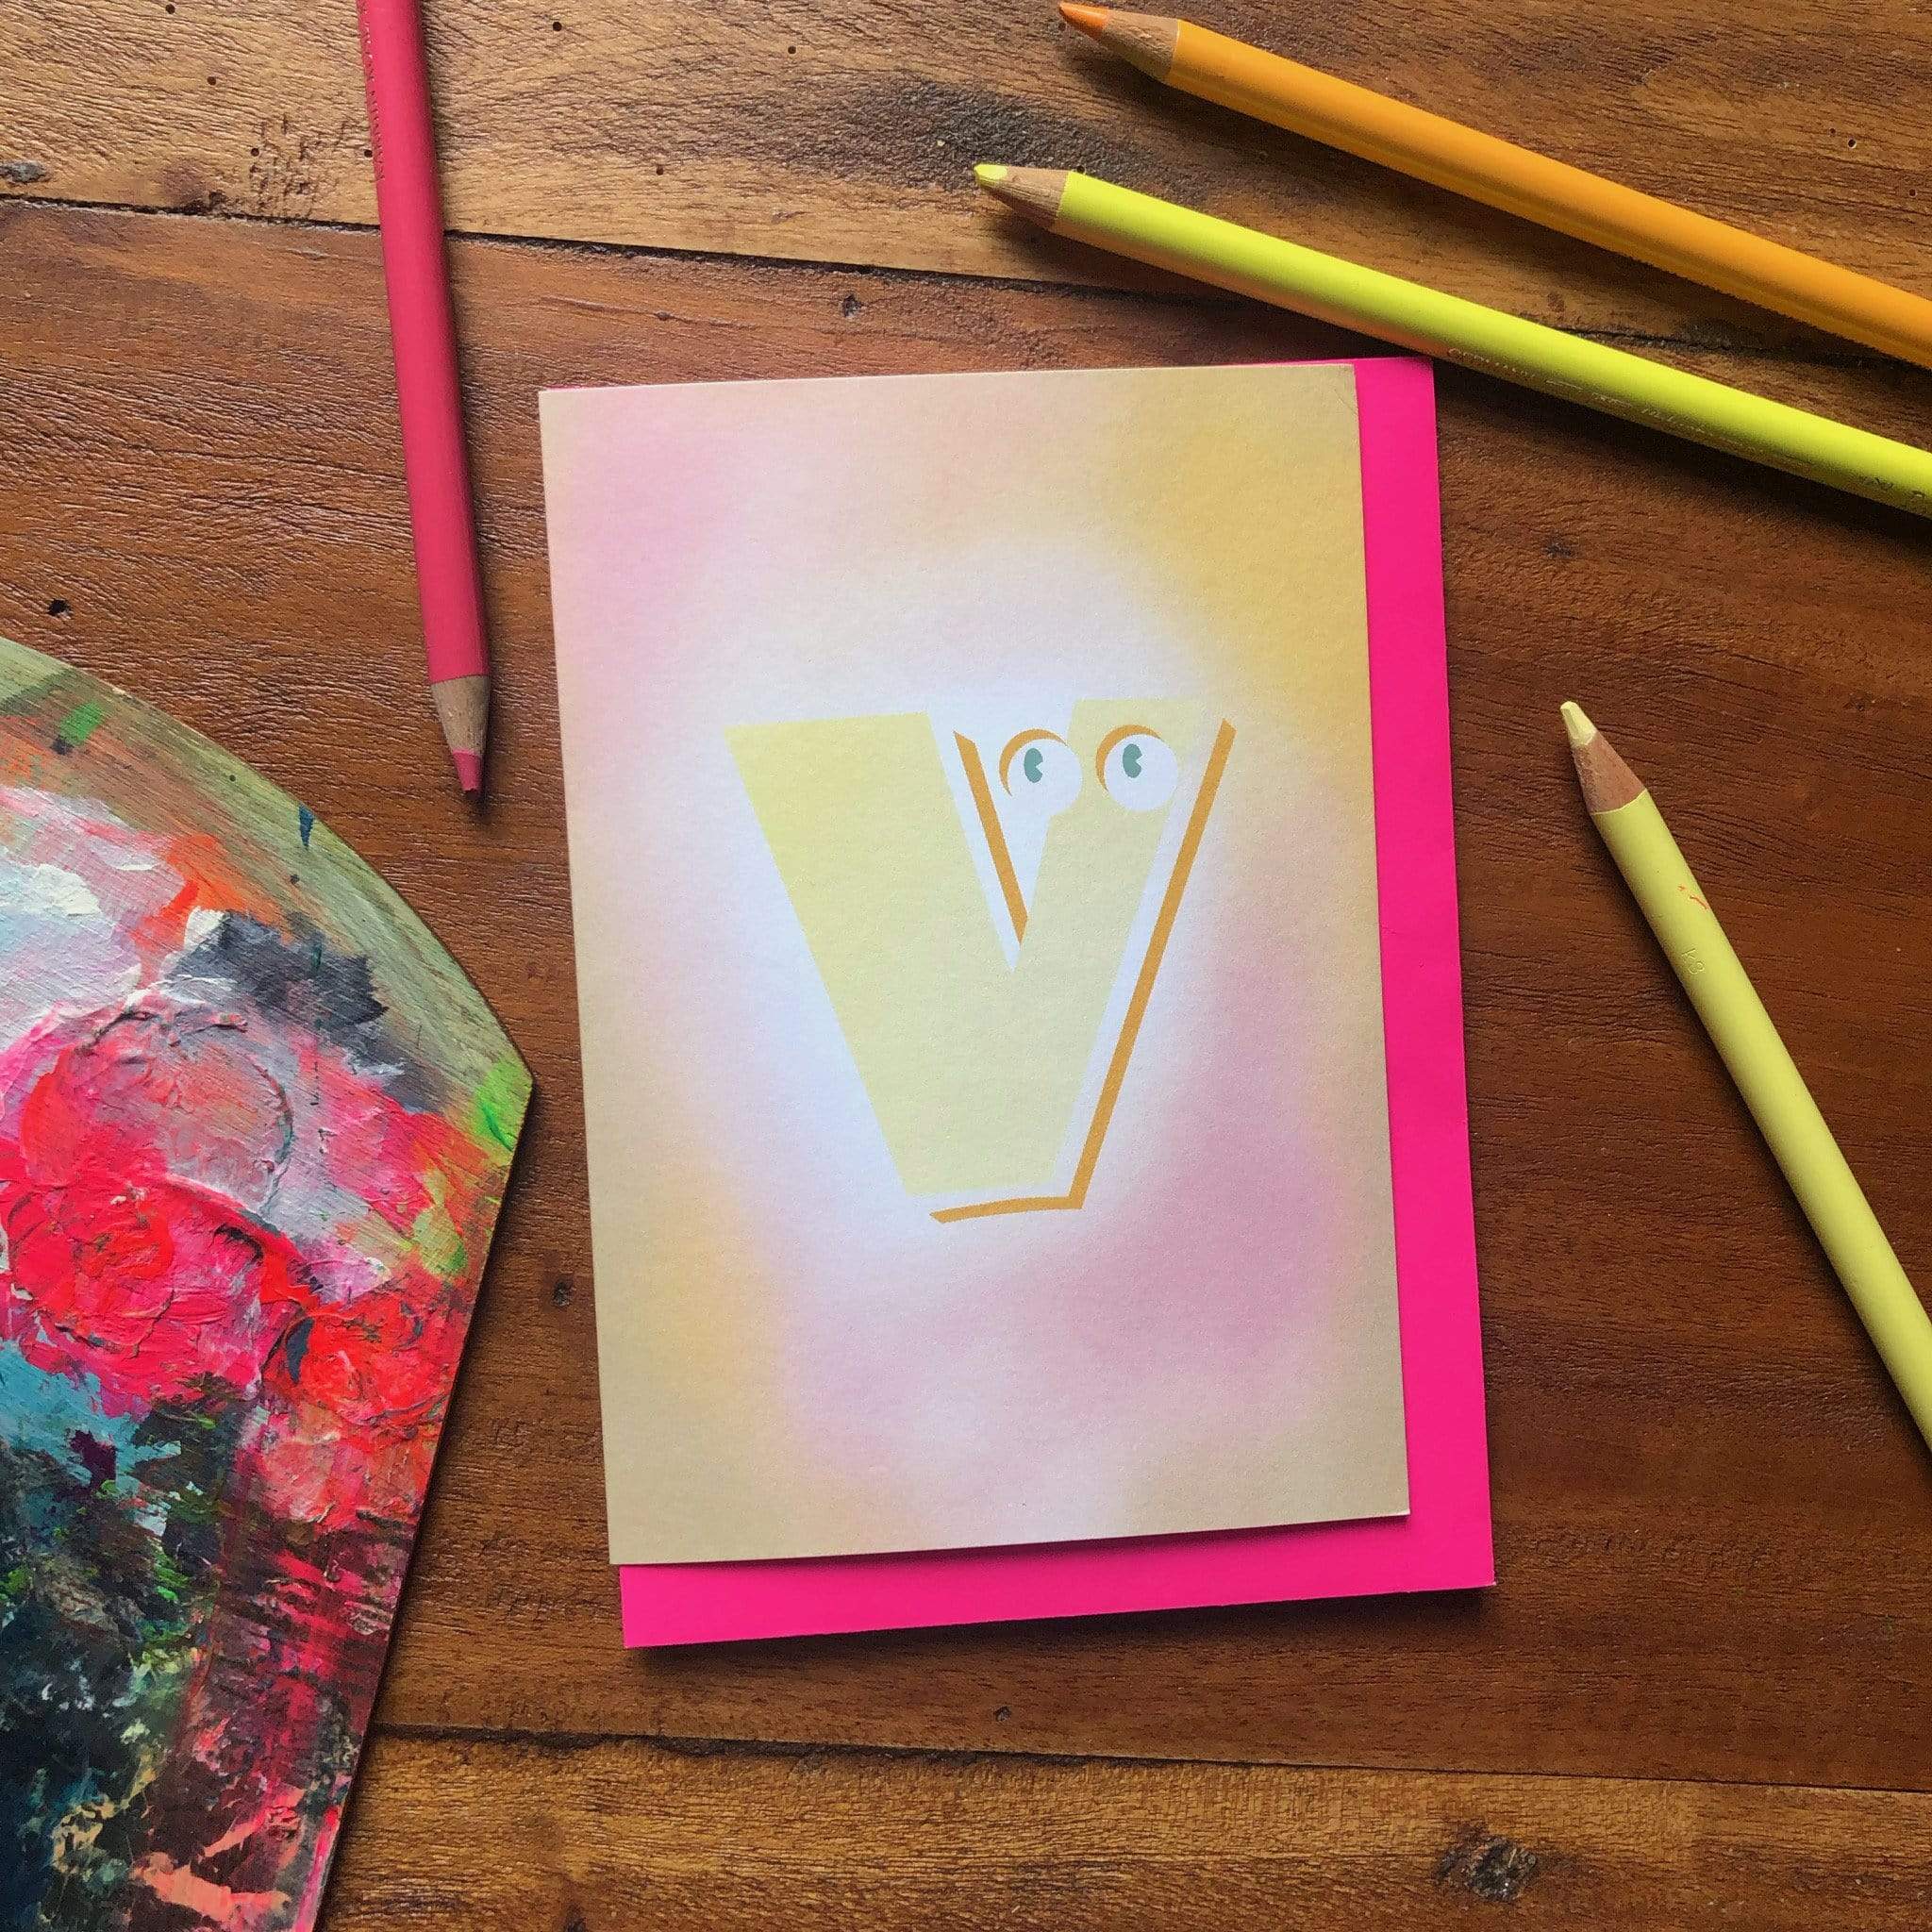 The Jolly Type V Greeting Card